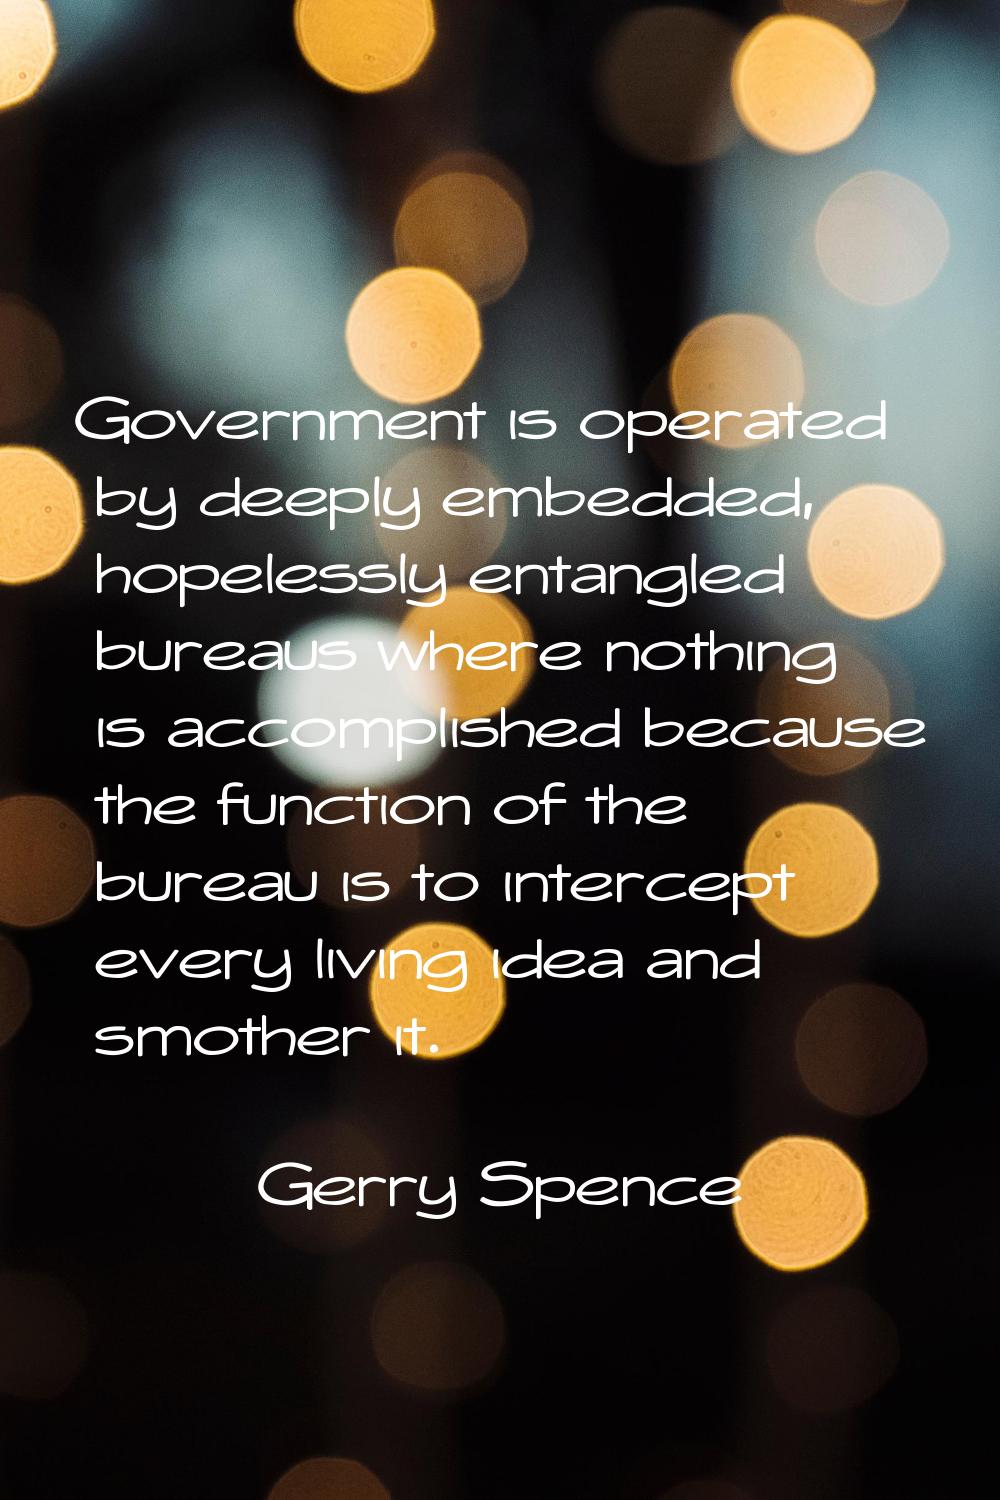 Government is operated by deeply embedded, hopelessly entangled bureaus where nothing is accomplish